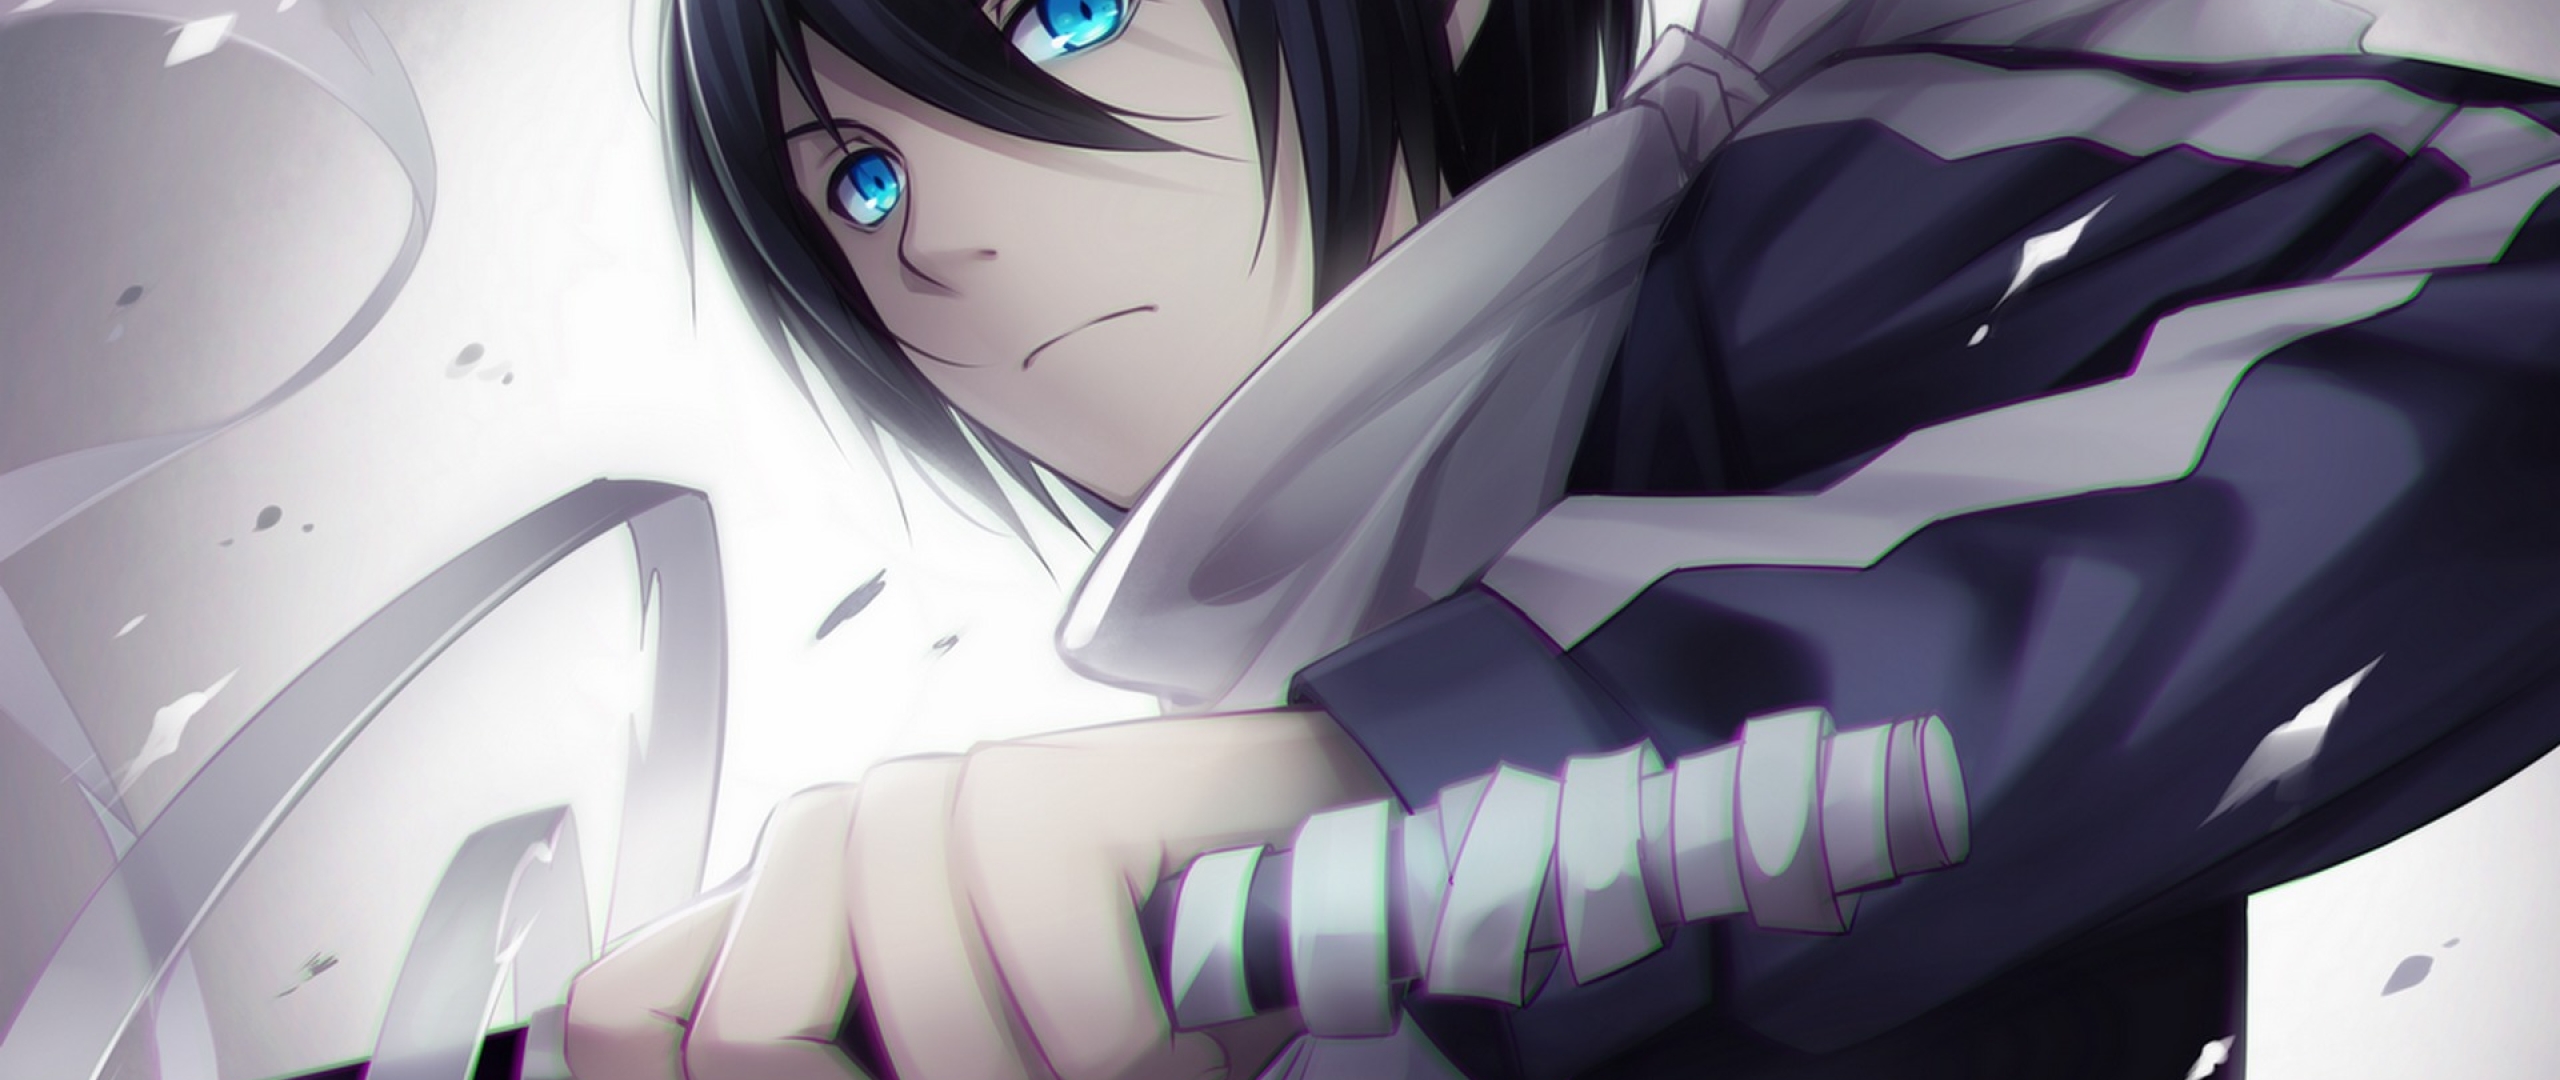 2560x1080 Noragami Yato Anime 2560x1080 Resolution Wallpaper Hd Anime 4k Wallpapers Images Photos And Background Wallpapers Den